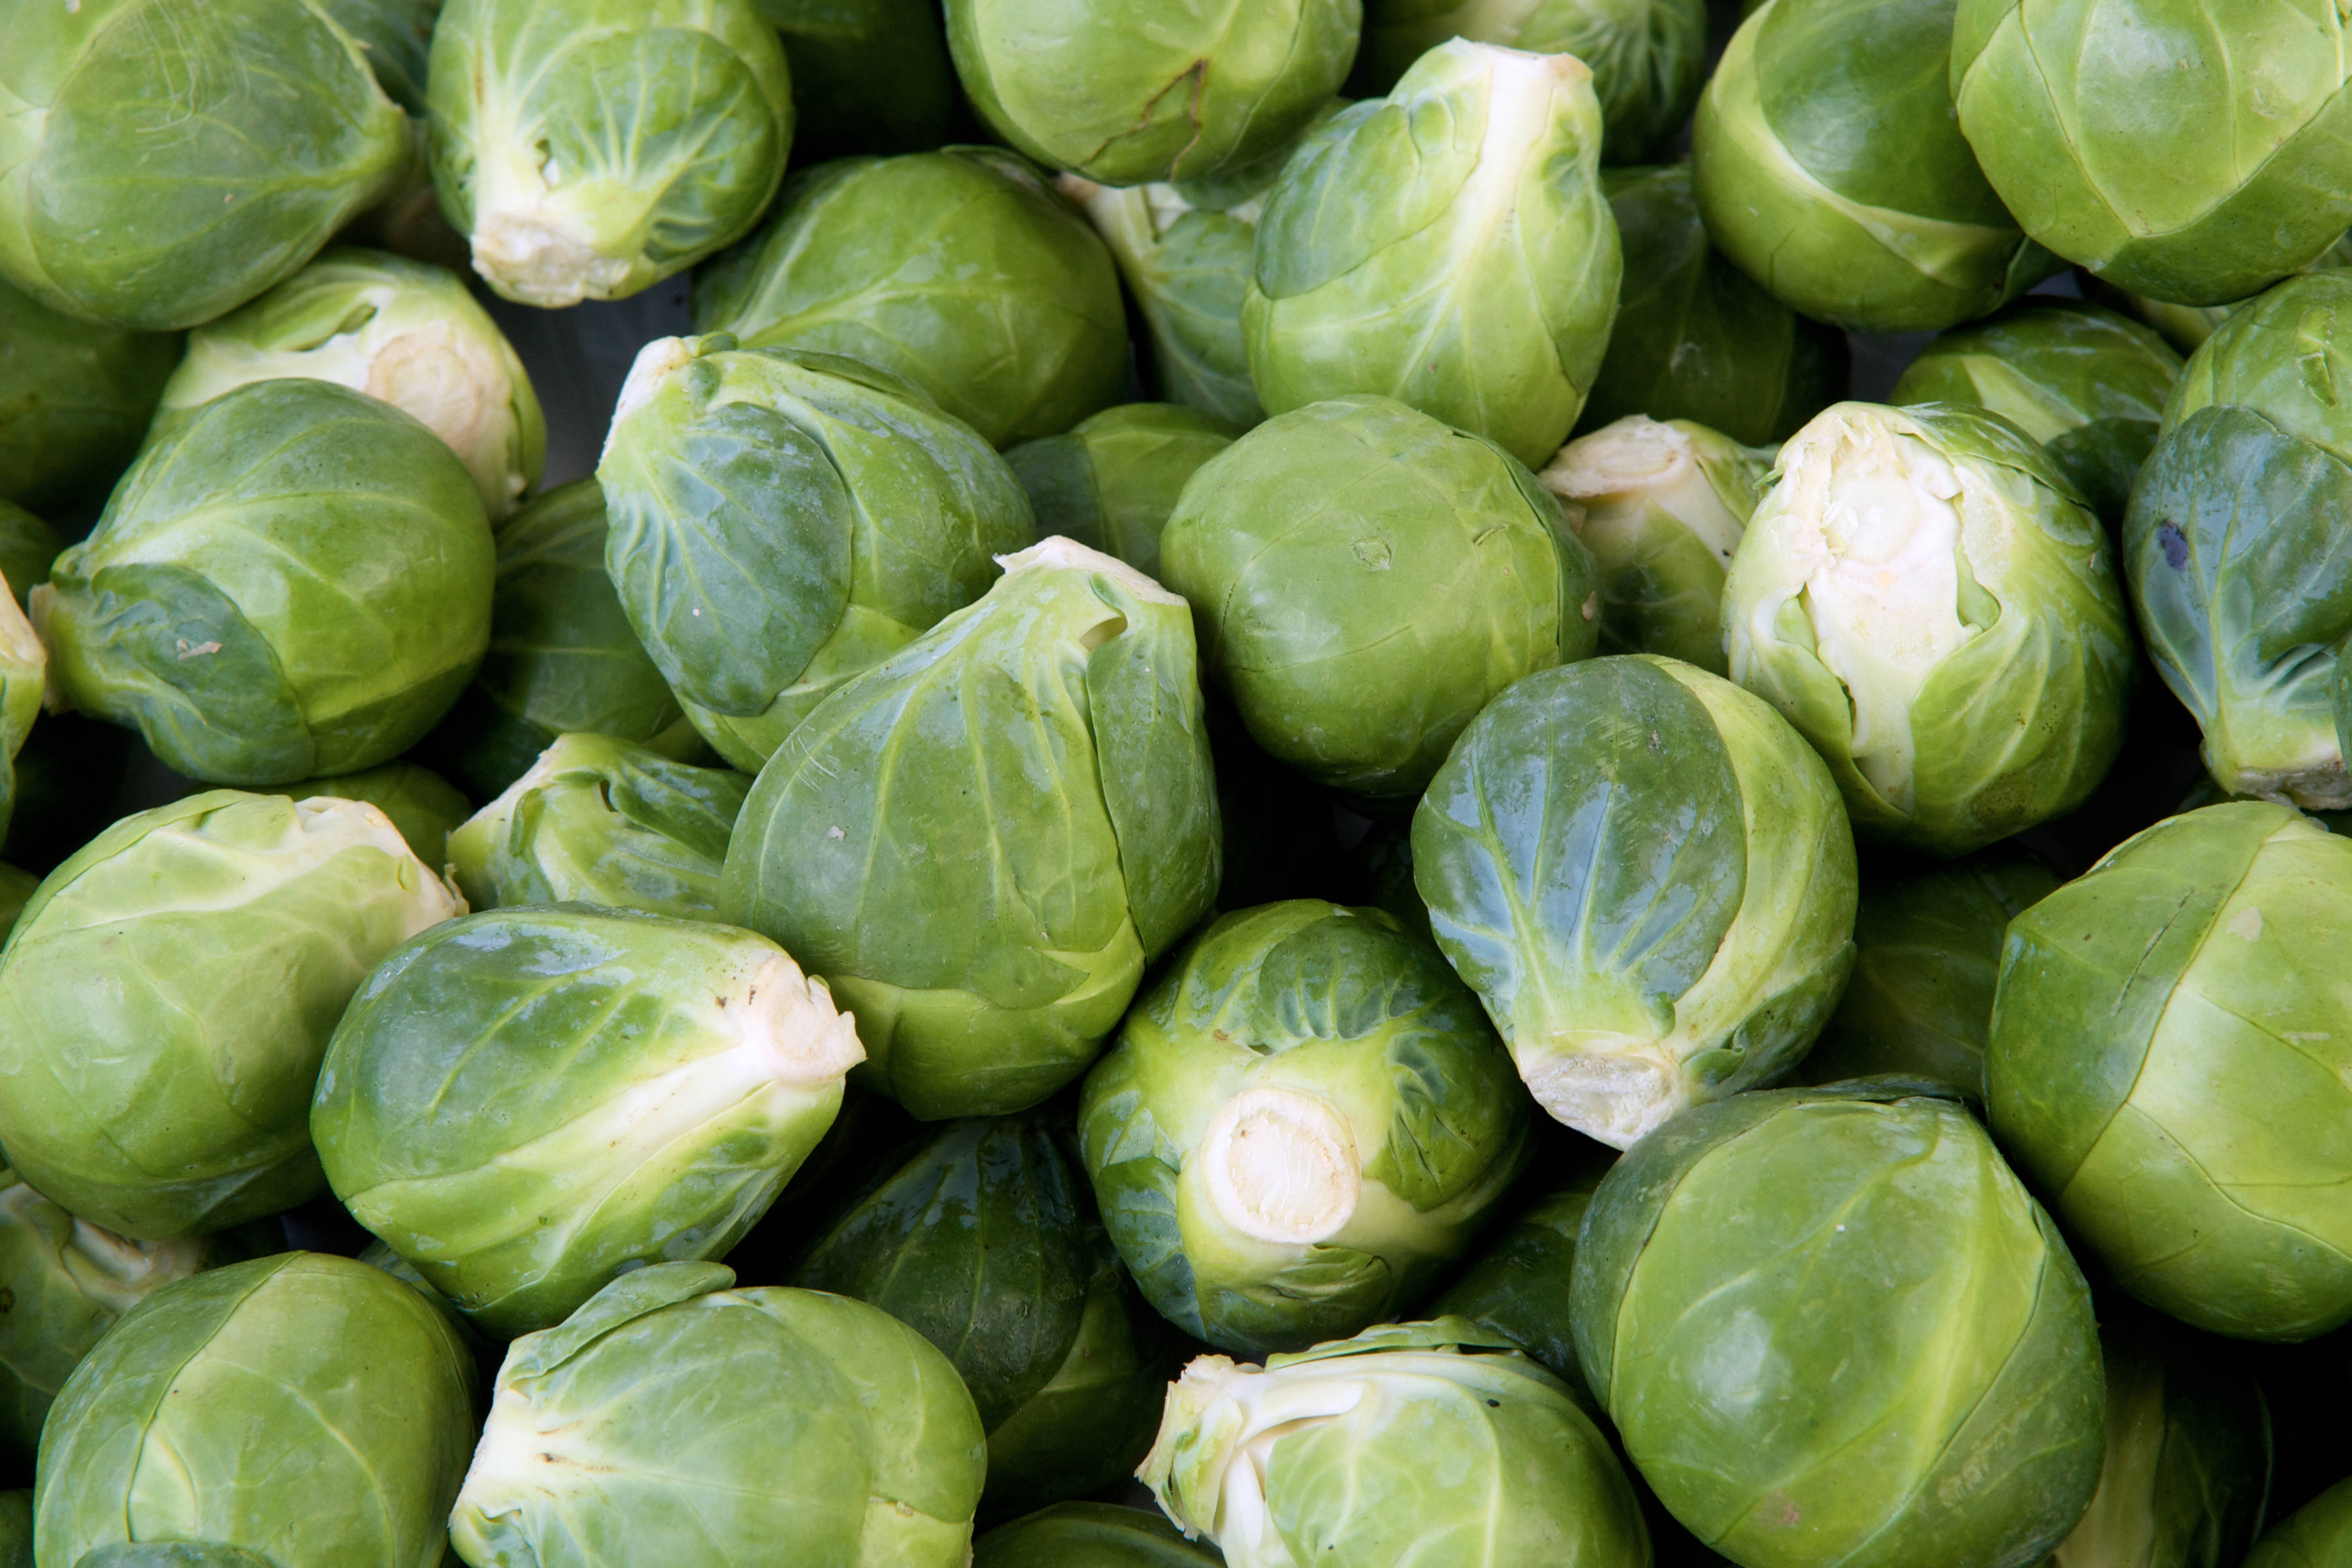 Brussels sprouts. Photo: AndyVernum1 / iStock.